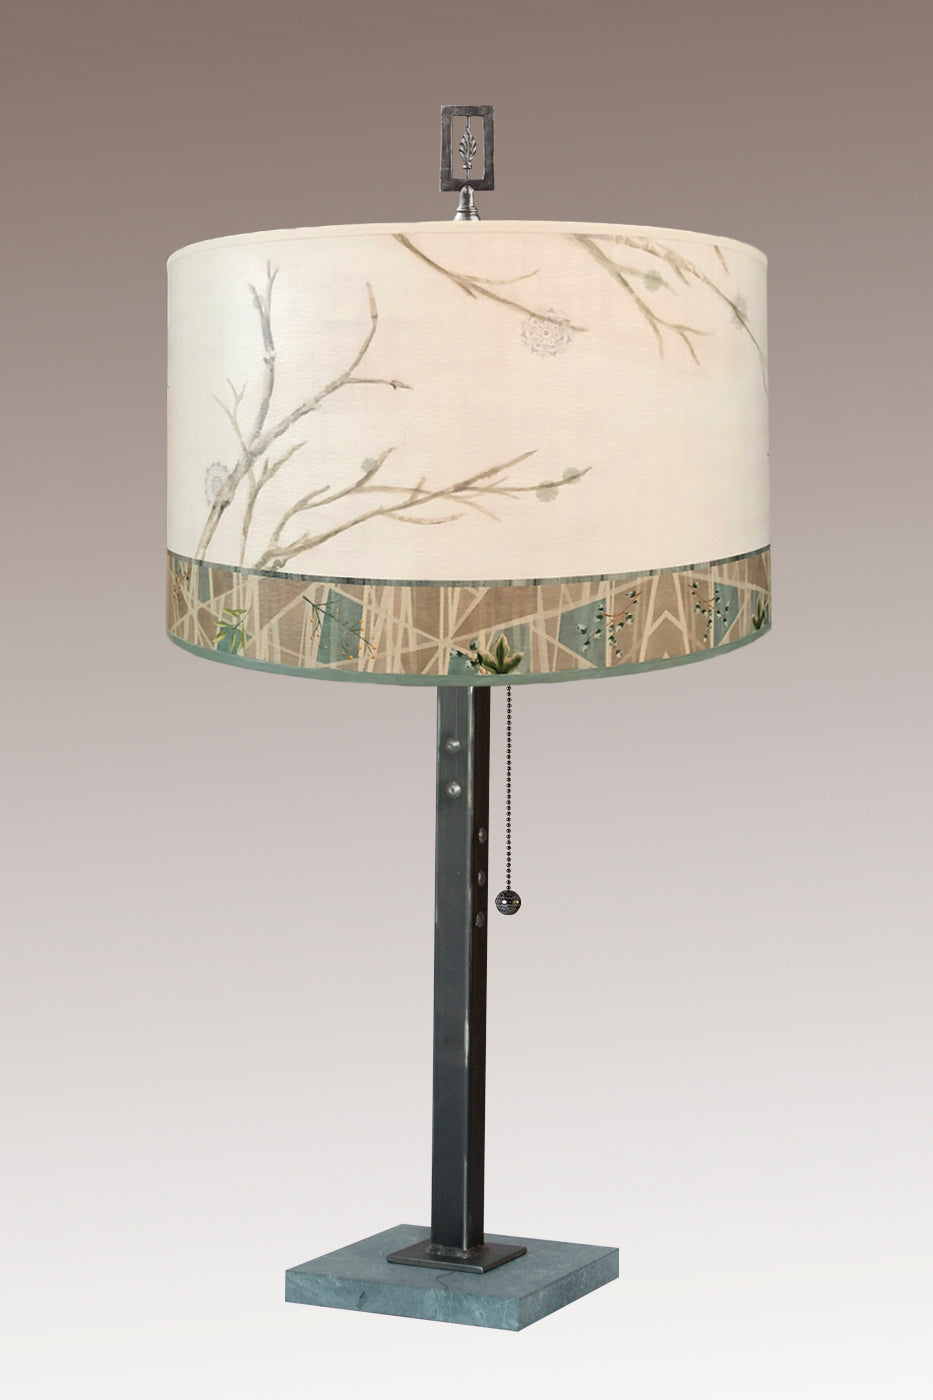 Janna Ugone &amp; Co Table Lamps Steel Table Lamp with Large Drum Shade in Prism Branch